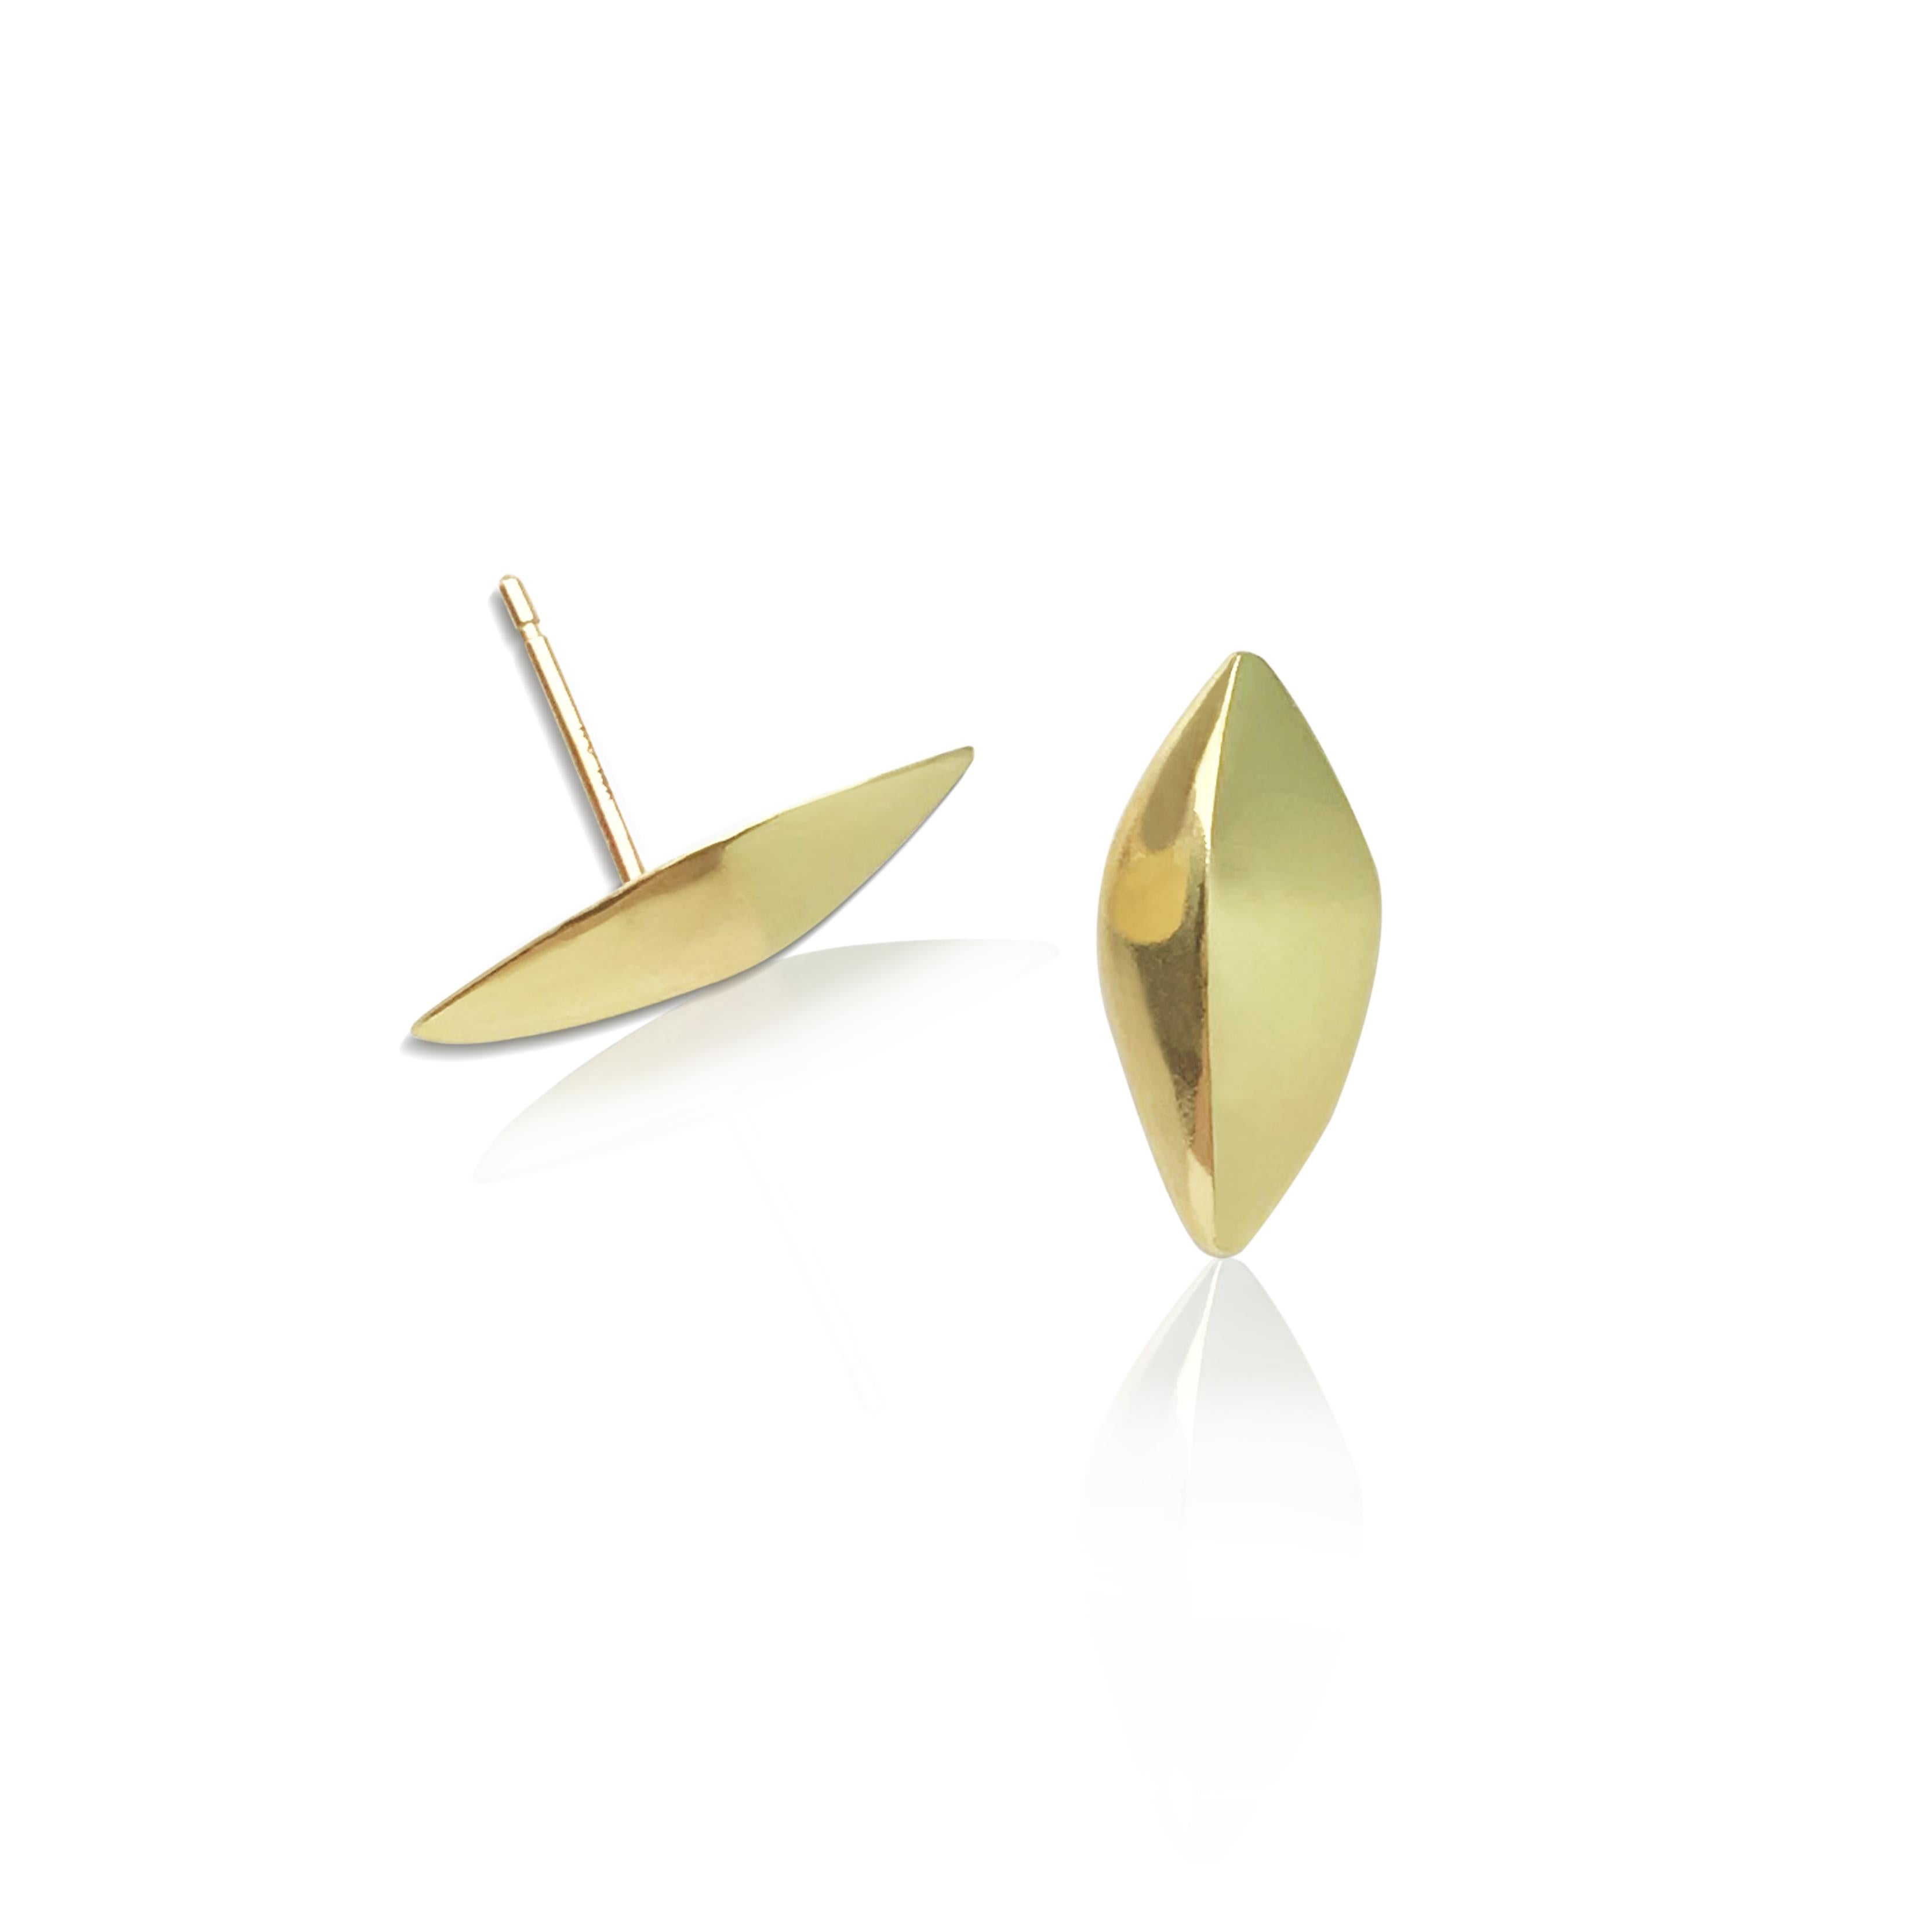 Our FAIRMINED Gold Flora Leaf Post Earrings from our Modern Story Collection bring to mind the minimalistic simplicity of a leaf lightly sitting on your ear. Easy to wear and small in stature so they can be worn as a single earring or as a pair.